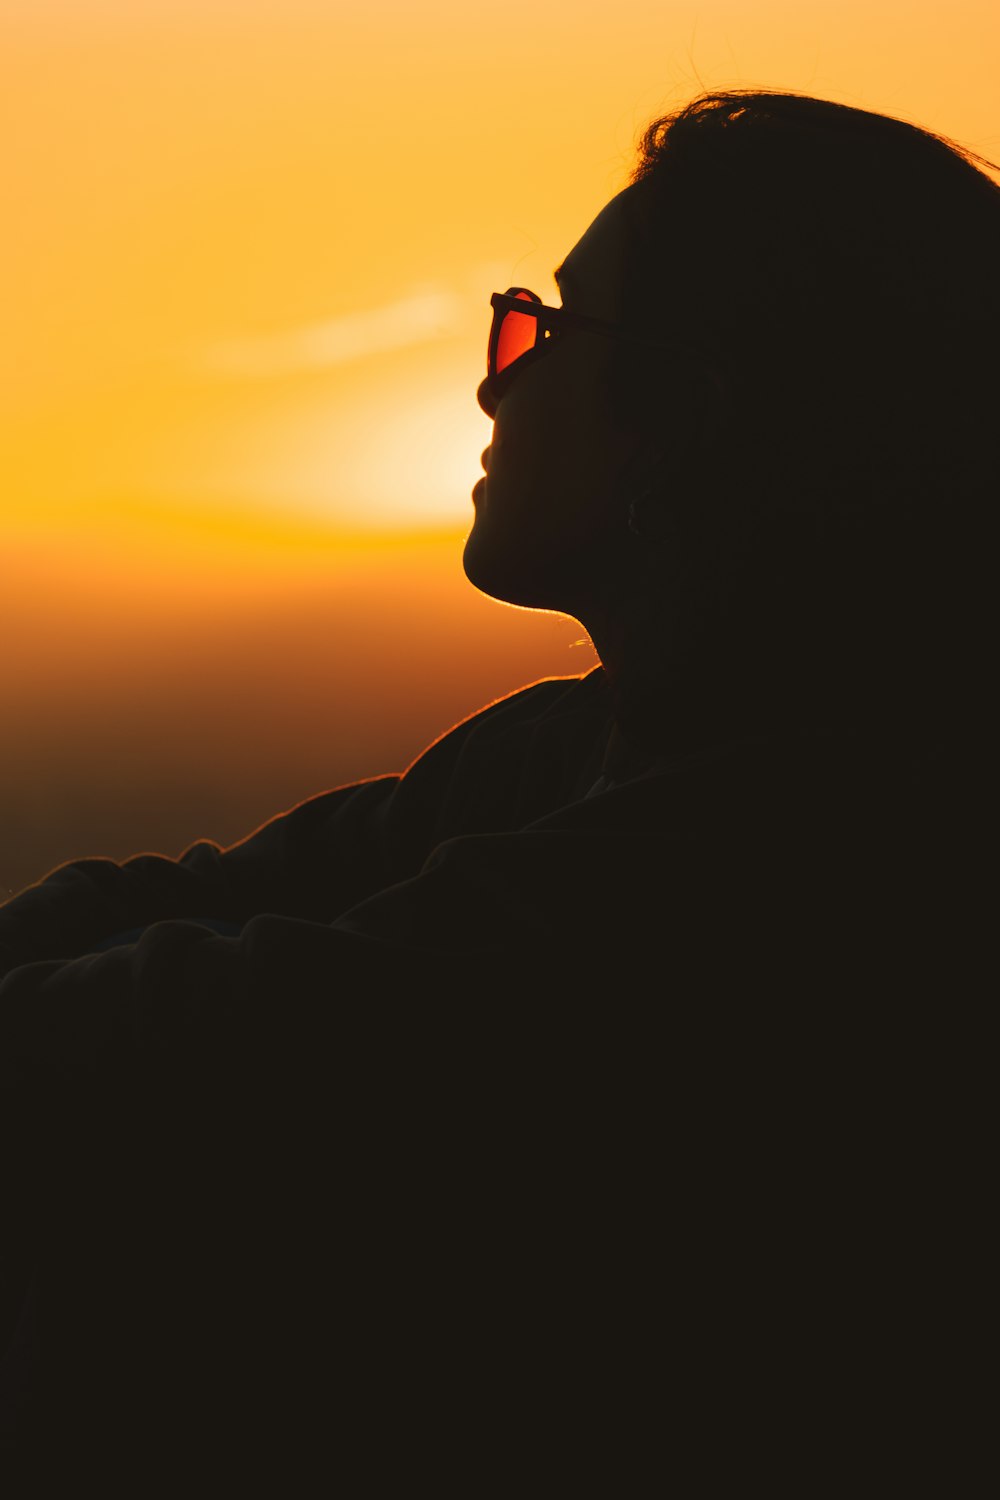 a woman wearing sunglasses looking at the sunset